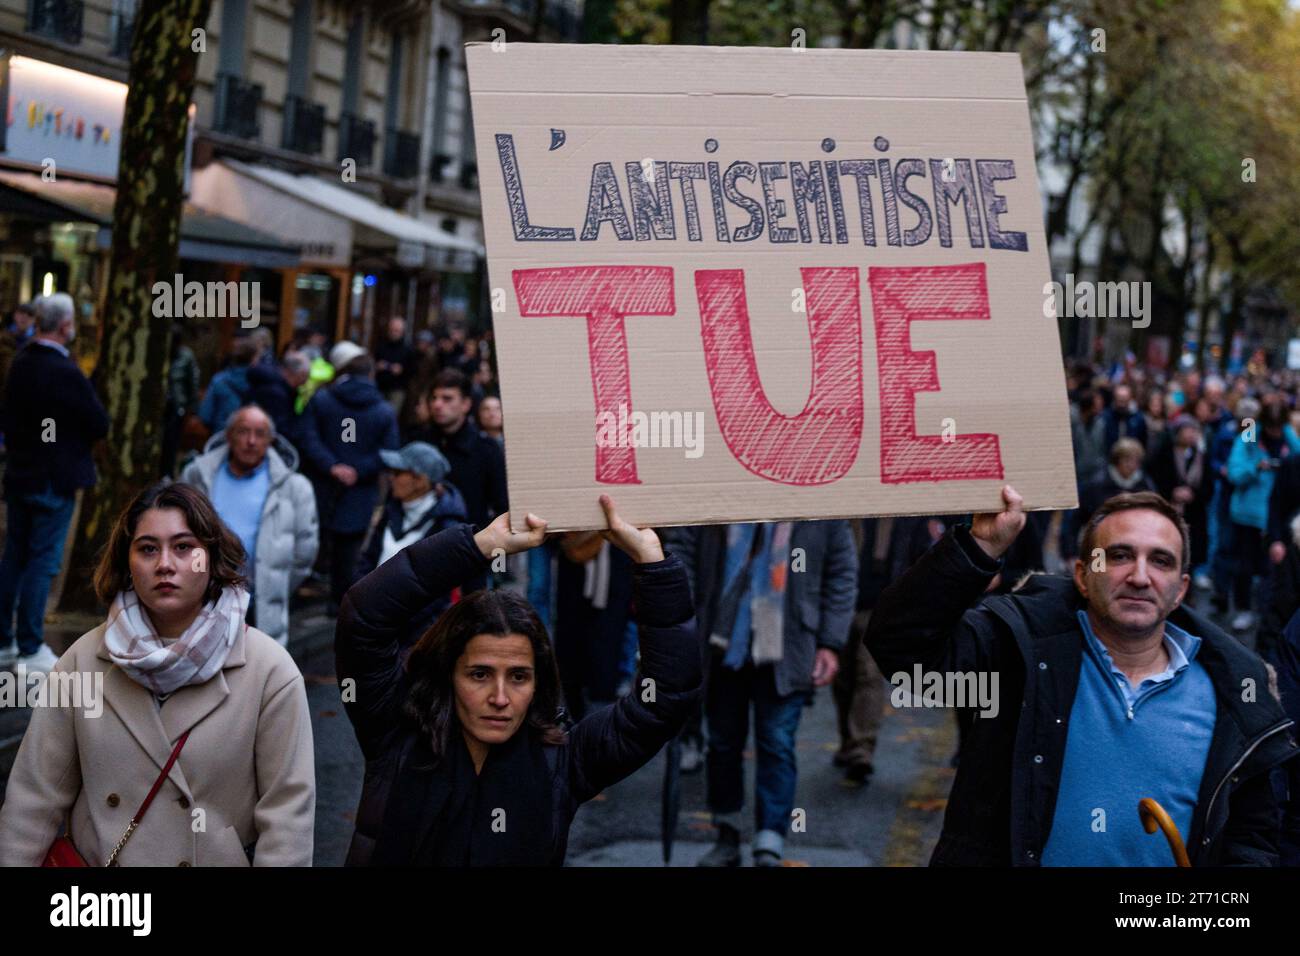 Tens of thousands march on Sunday November 12, 2023 in Paris against anti-Semitism amid bickering by political parties over who should take part and a surge in anti-Semitic incidents across France. Tensions have been rising in the French capital, home to large Jewish and Muslim communities, in the wake of the October 7 attack by Palestinian militant group Hamas on Israel, followed by a month of Israeli bombardment of the Gaza Strip. France has recorded nearly 1250 anti-Semitic acts since the attack. National Assembly speaker Yael Braun-Pivet and Gerard Larcher, the Senate speaker, called on No Stock Photo